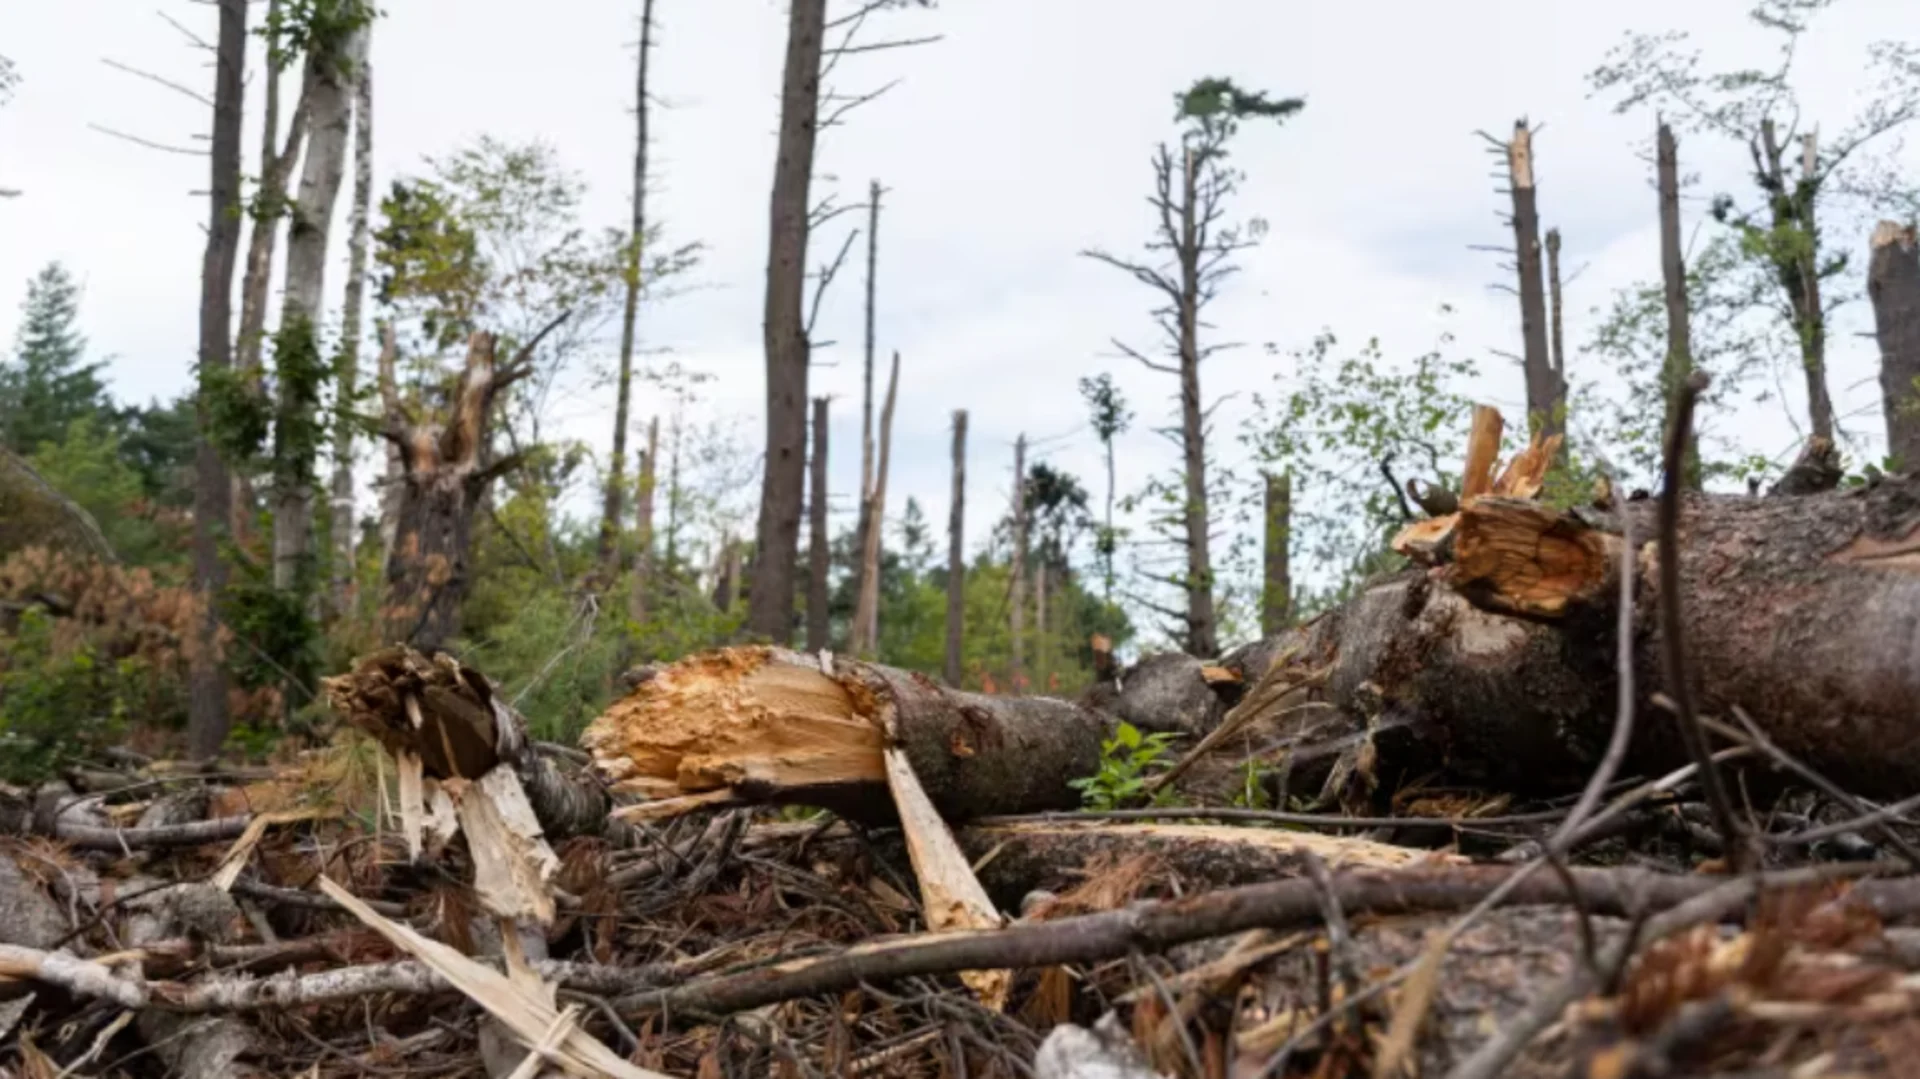 2 years after the devastating derecho swept across parts of Ontario, a reforestation program is taking root. See the story, here